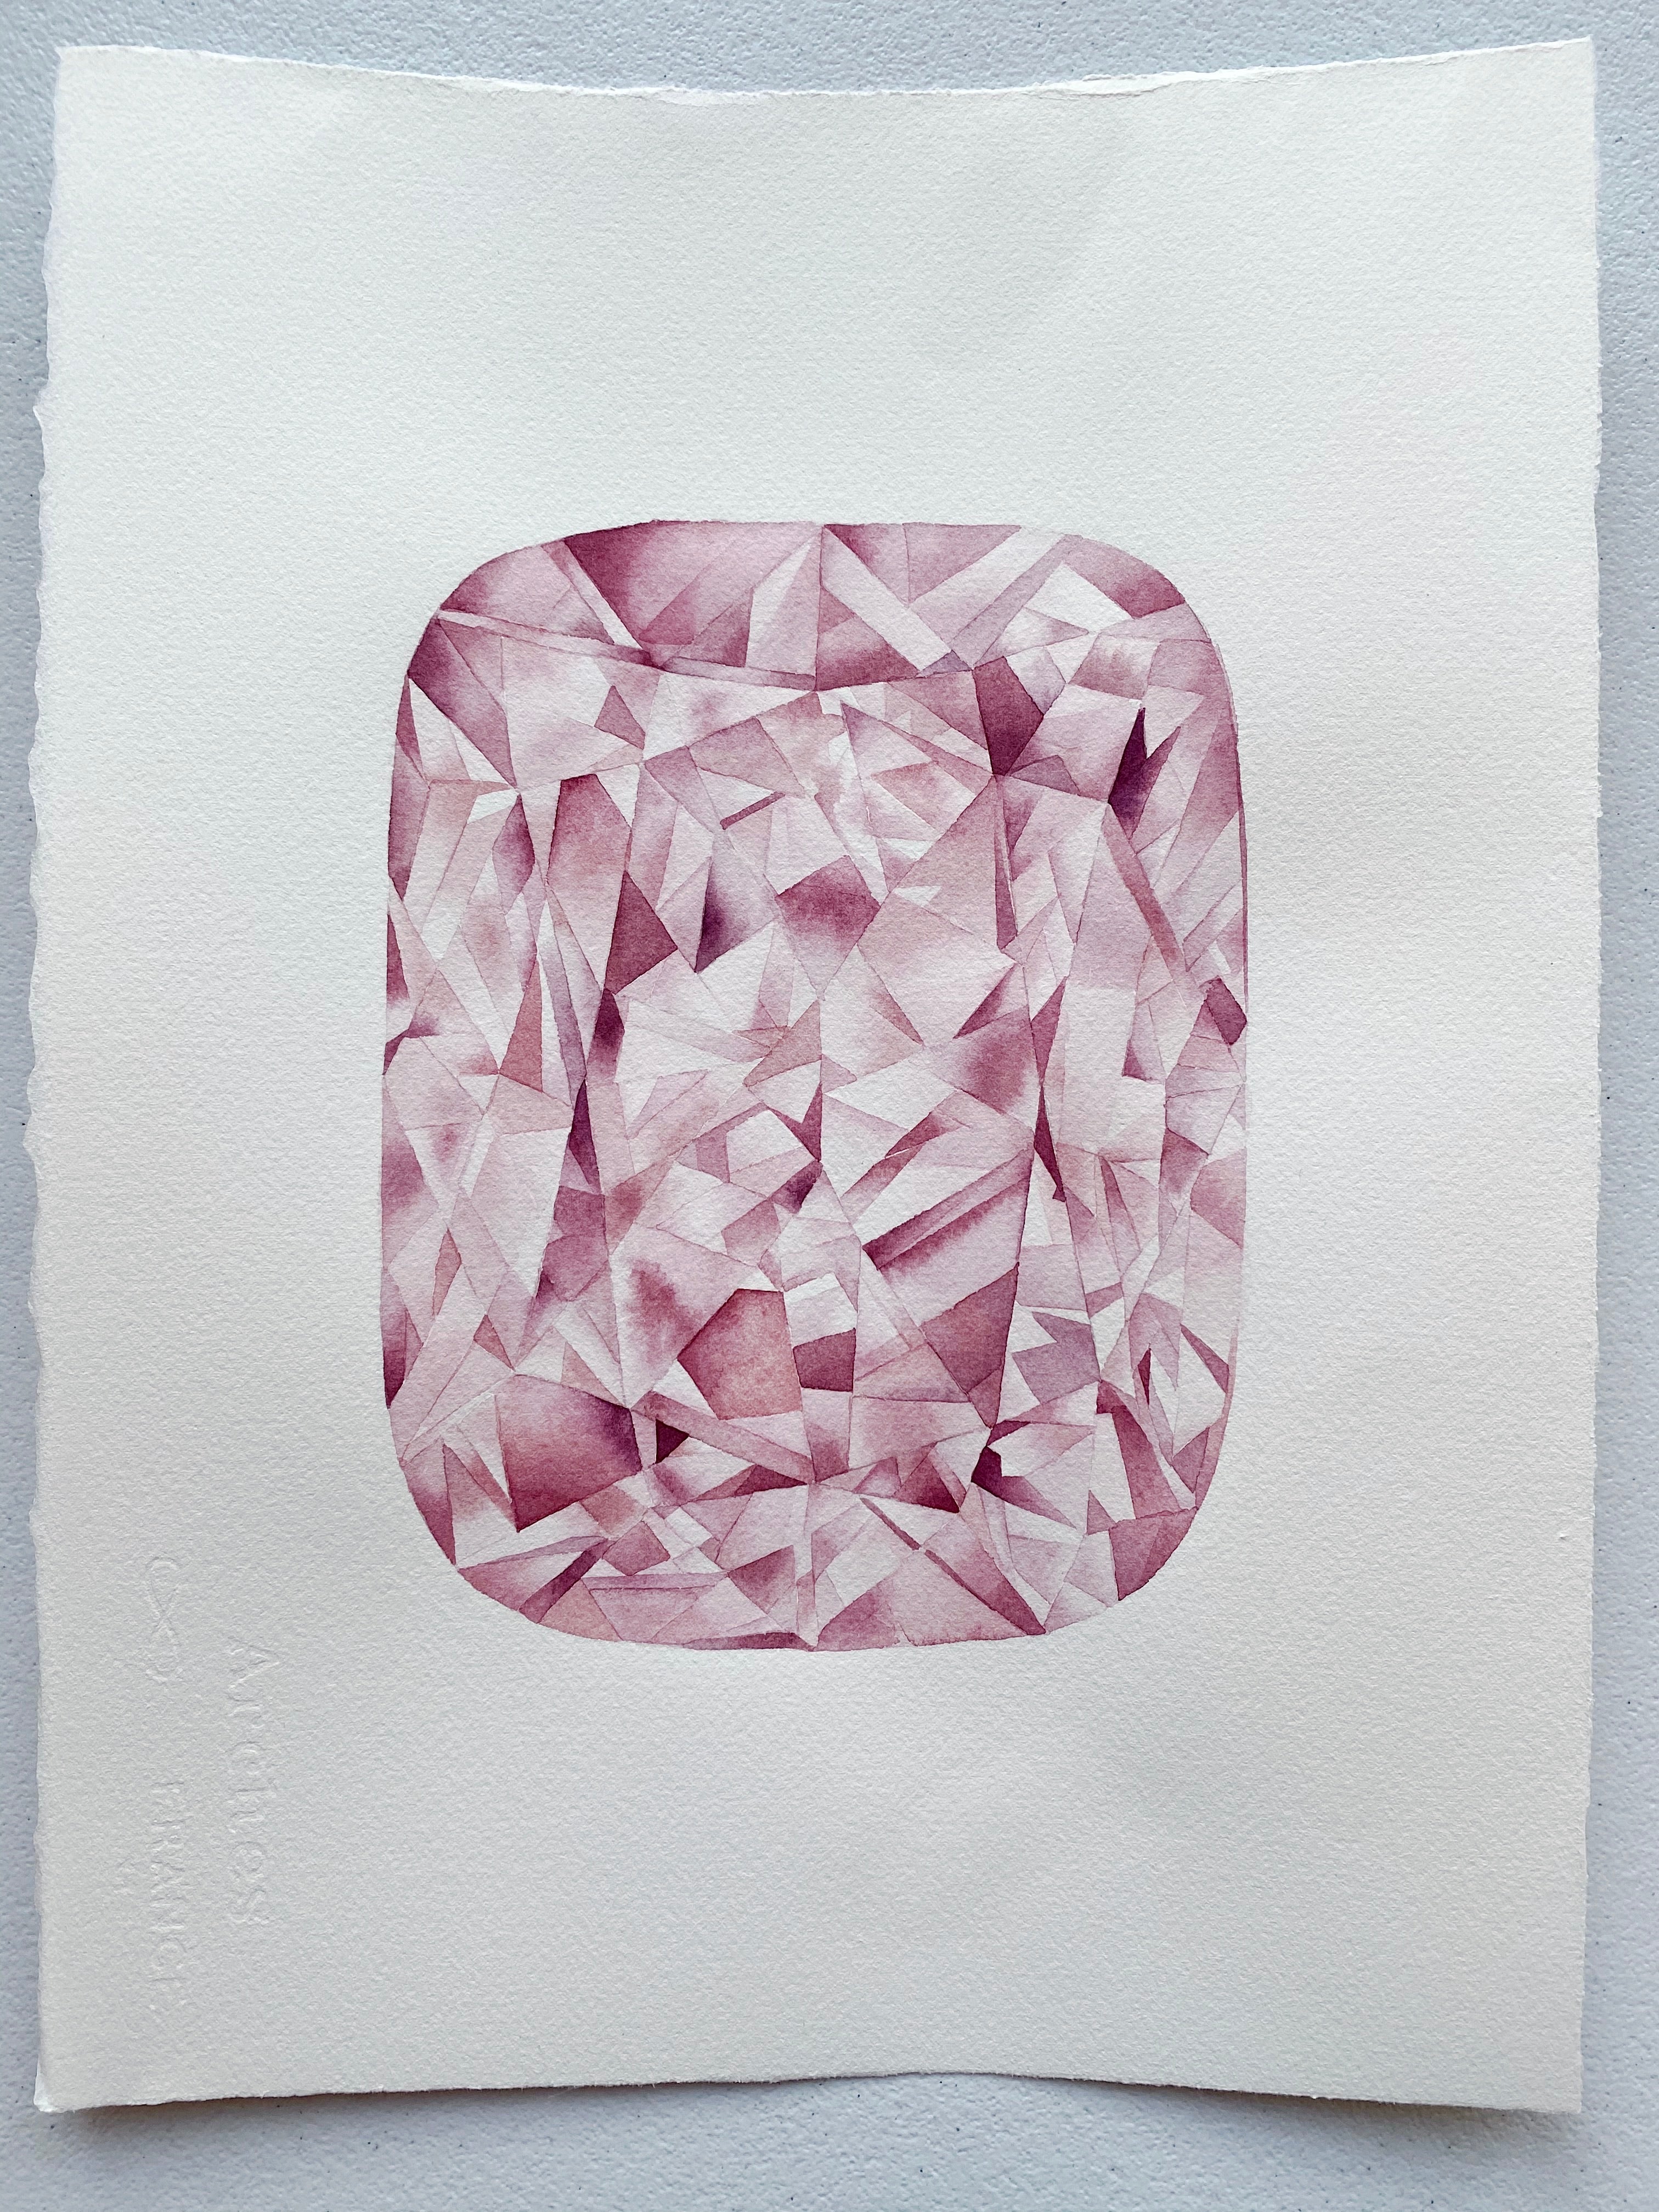 Original Painting - Watercolor Pink Diamond Painting 11x15 inches